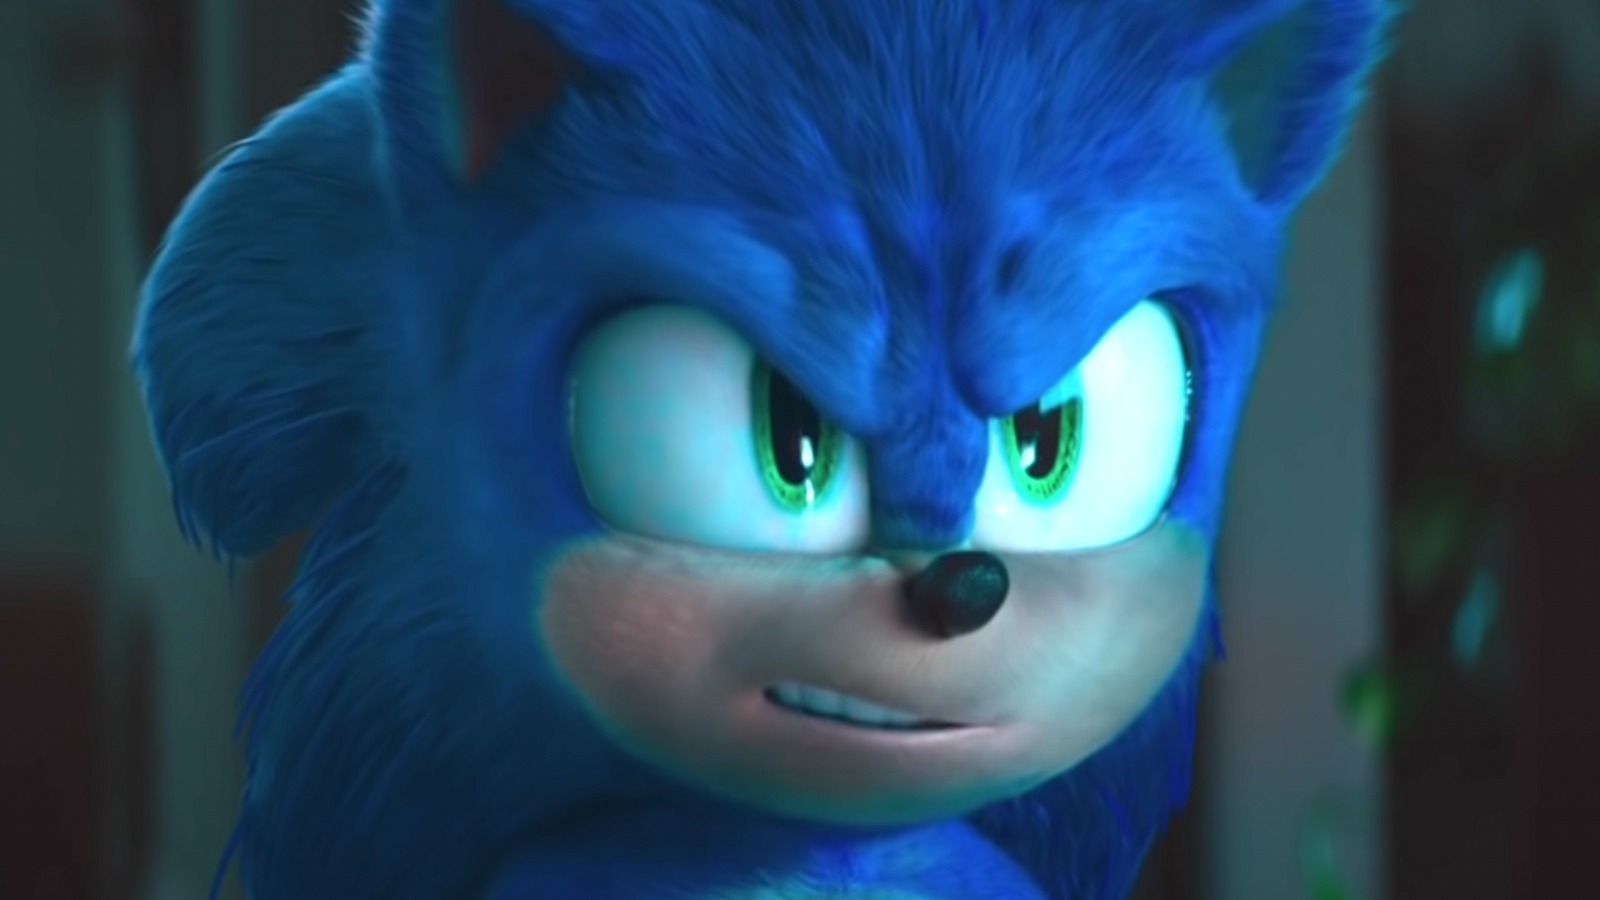 Sonic the Hedgehog 2' Hits 69% 'Fresh' Rating on Rotten Tomatoes